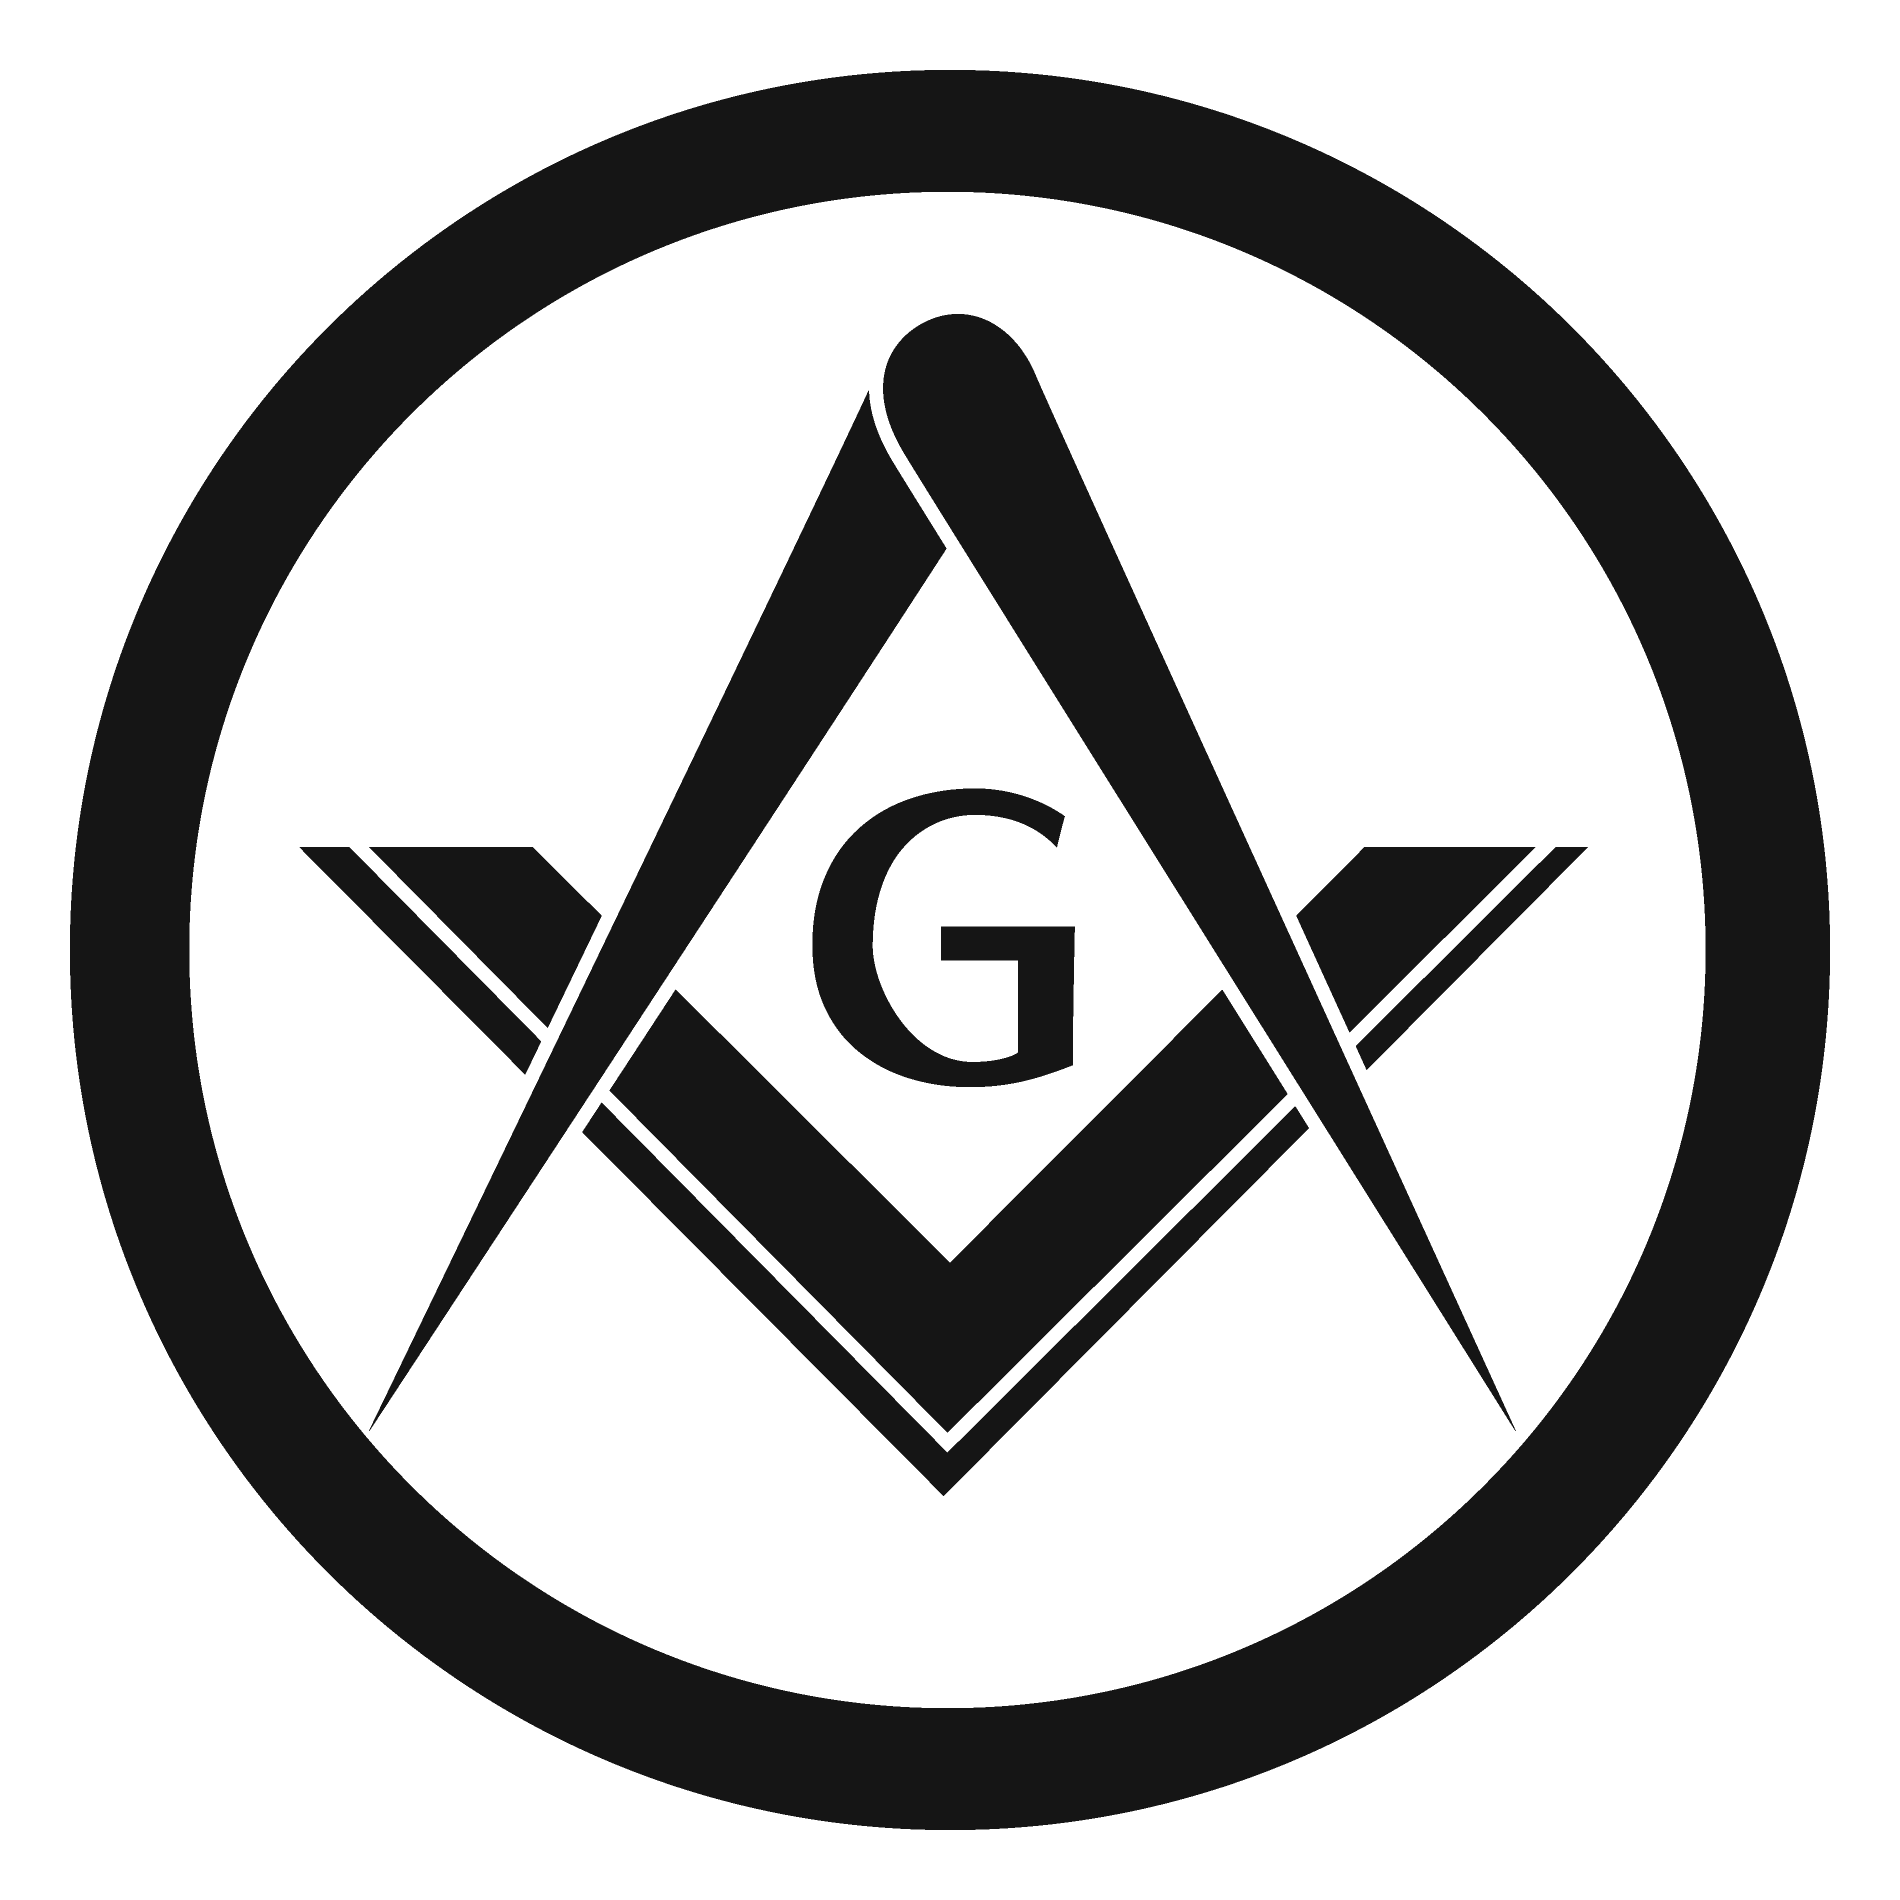 Masonic images graphics clipart images gallery for free.